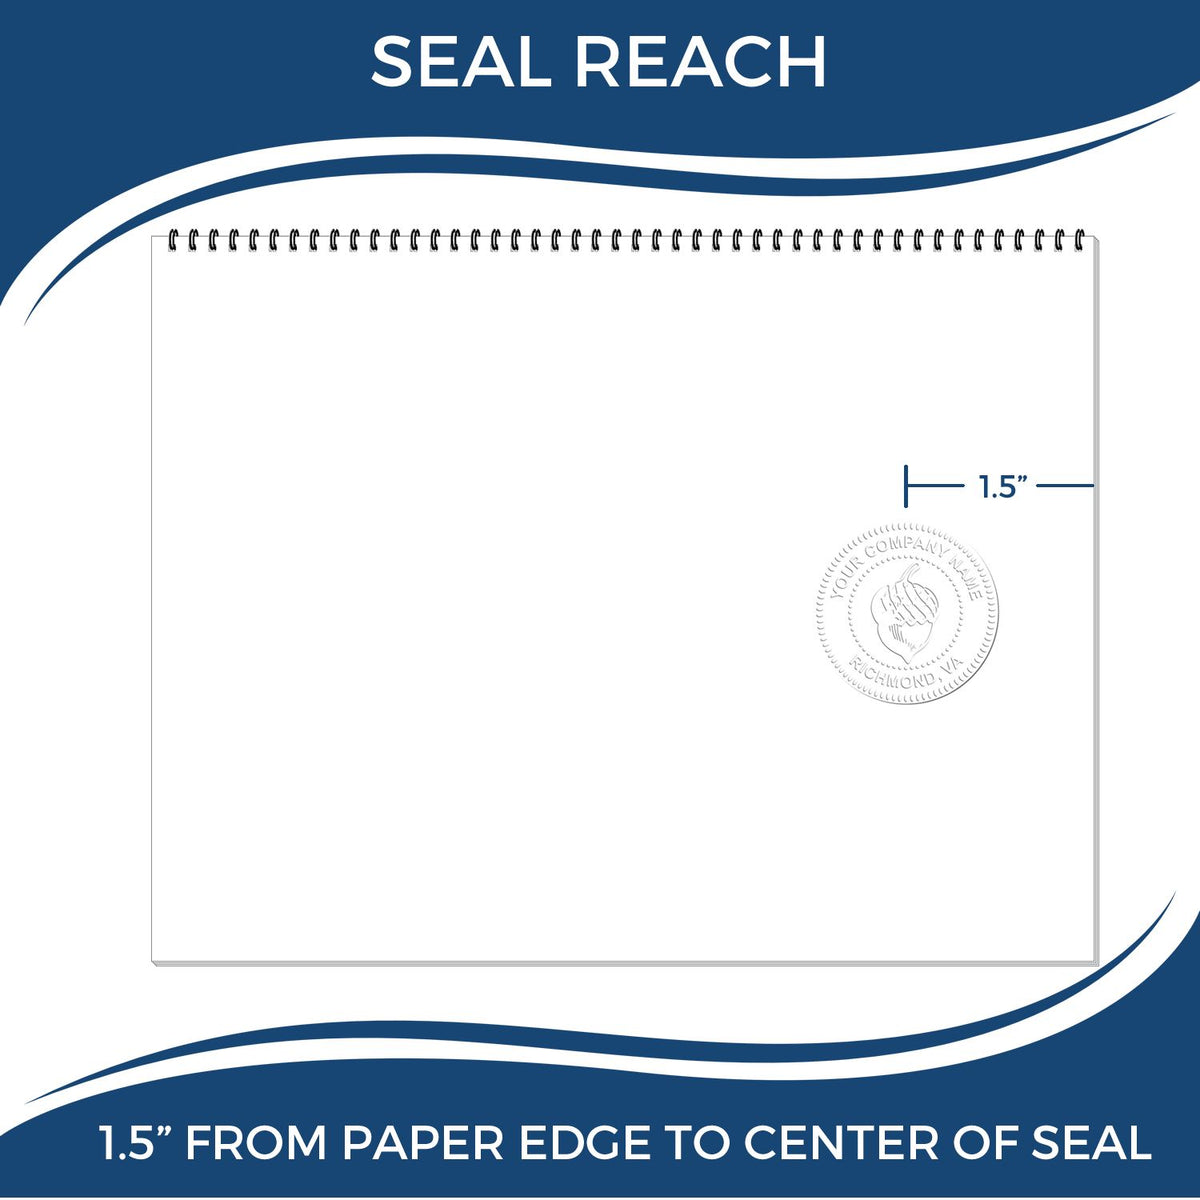 An infographic showing the seal reach which is represented by a ruler and a miniature seal image of the Gift Louisiana Land Surveyor Seal